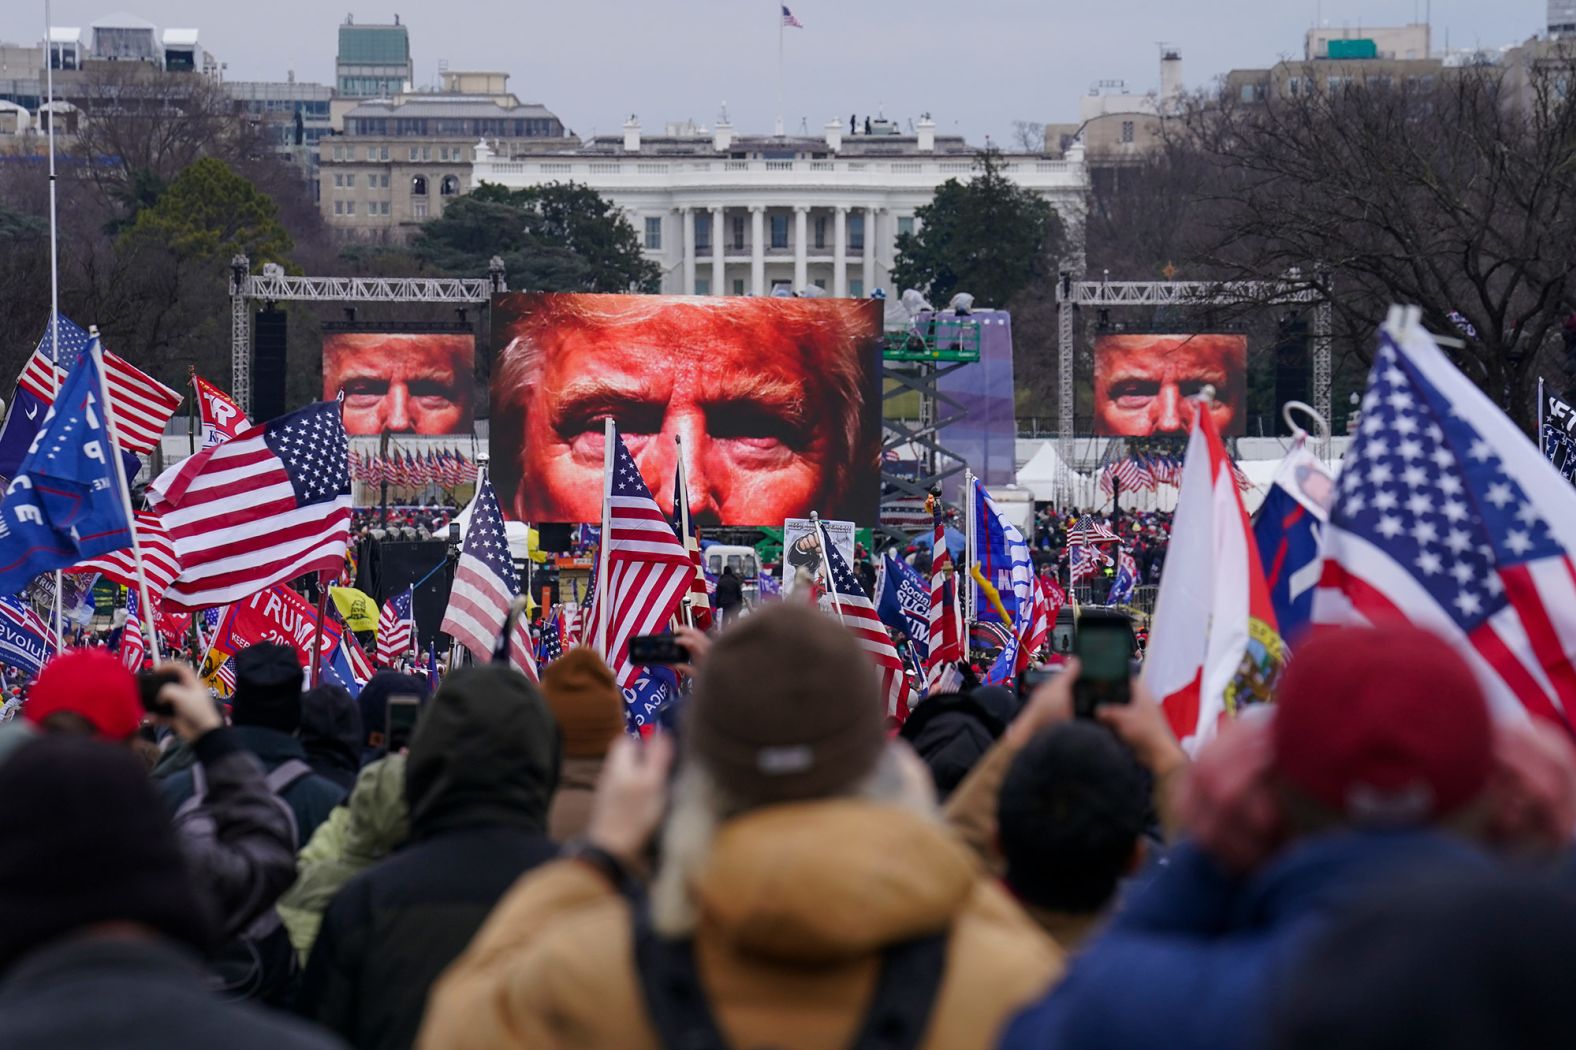 Trump supporters participate in a rally near the White House.